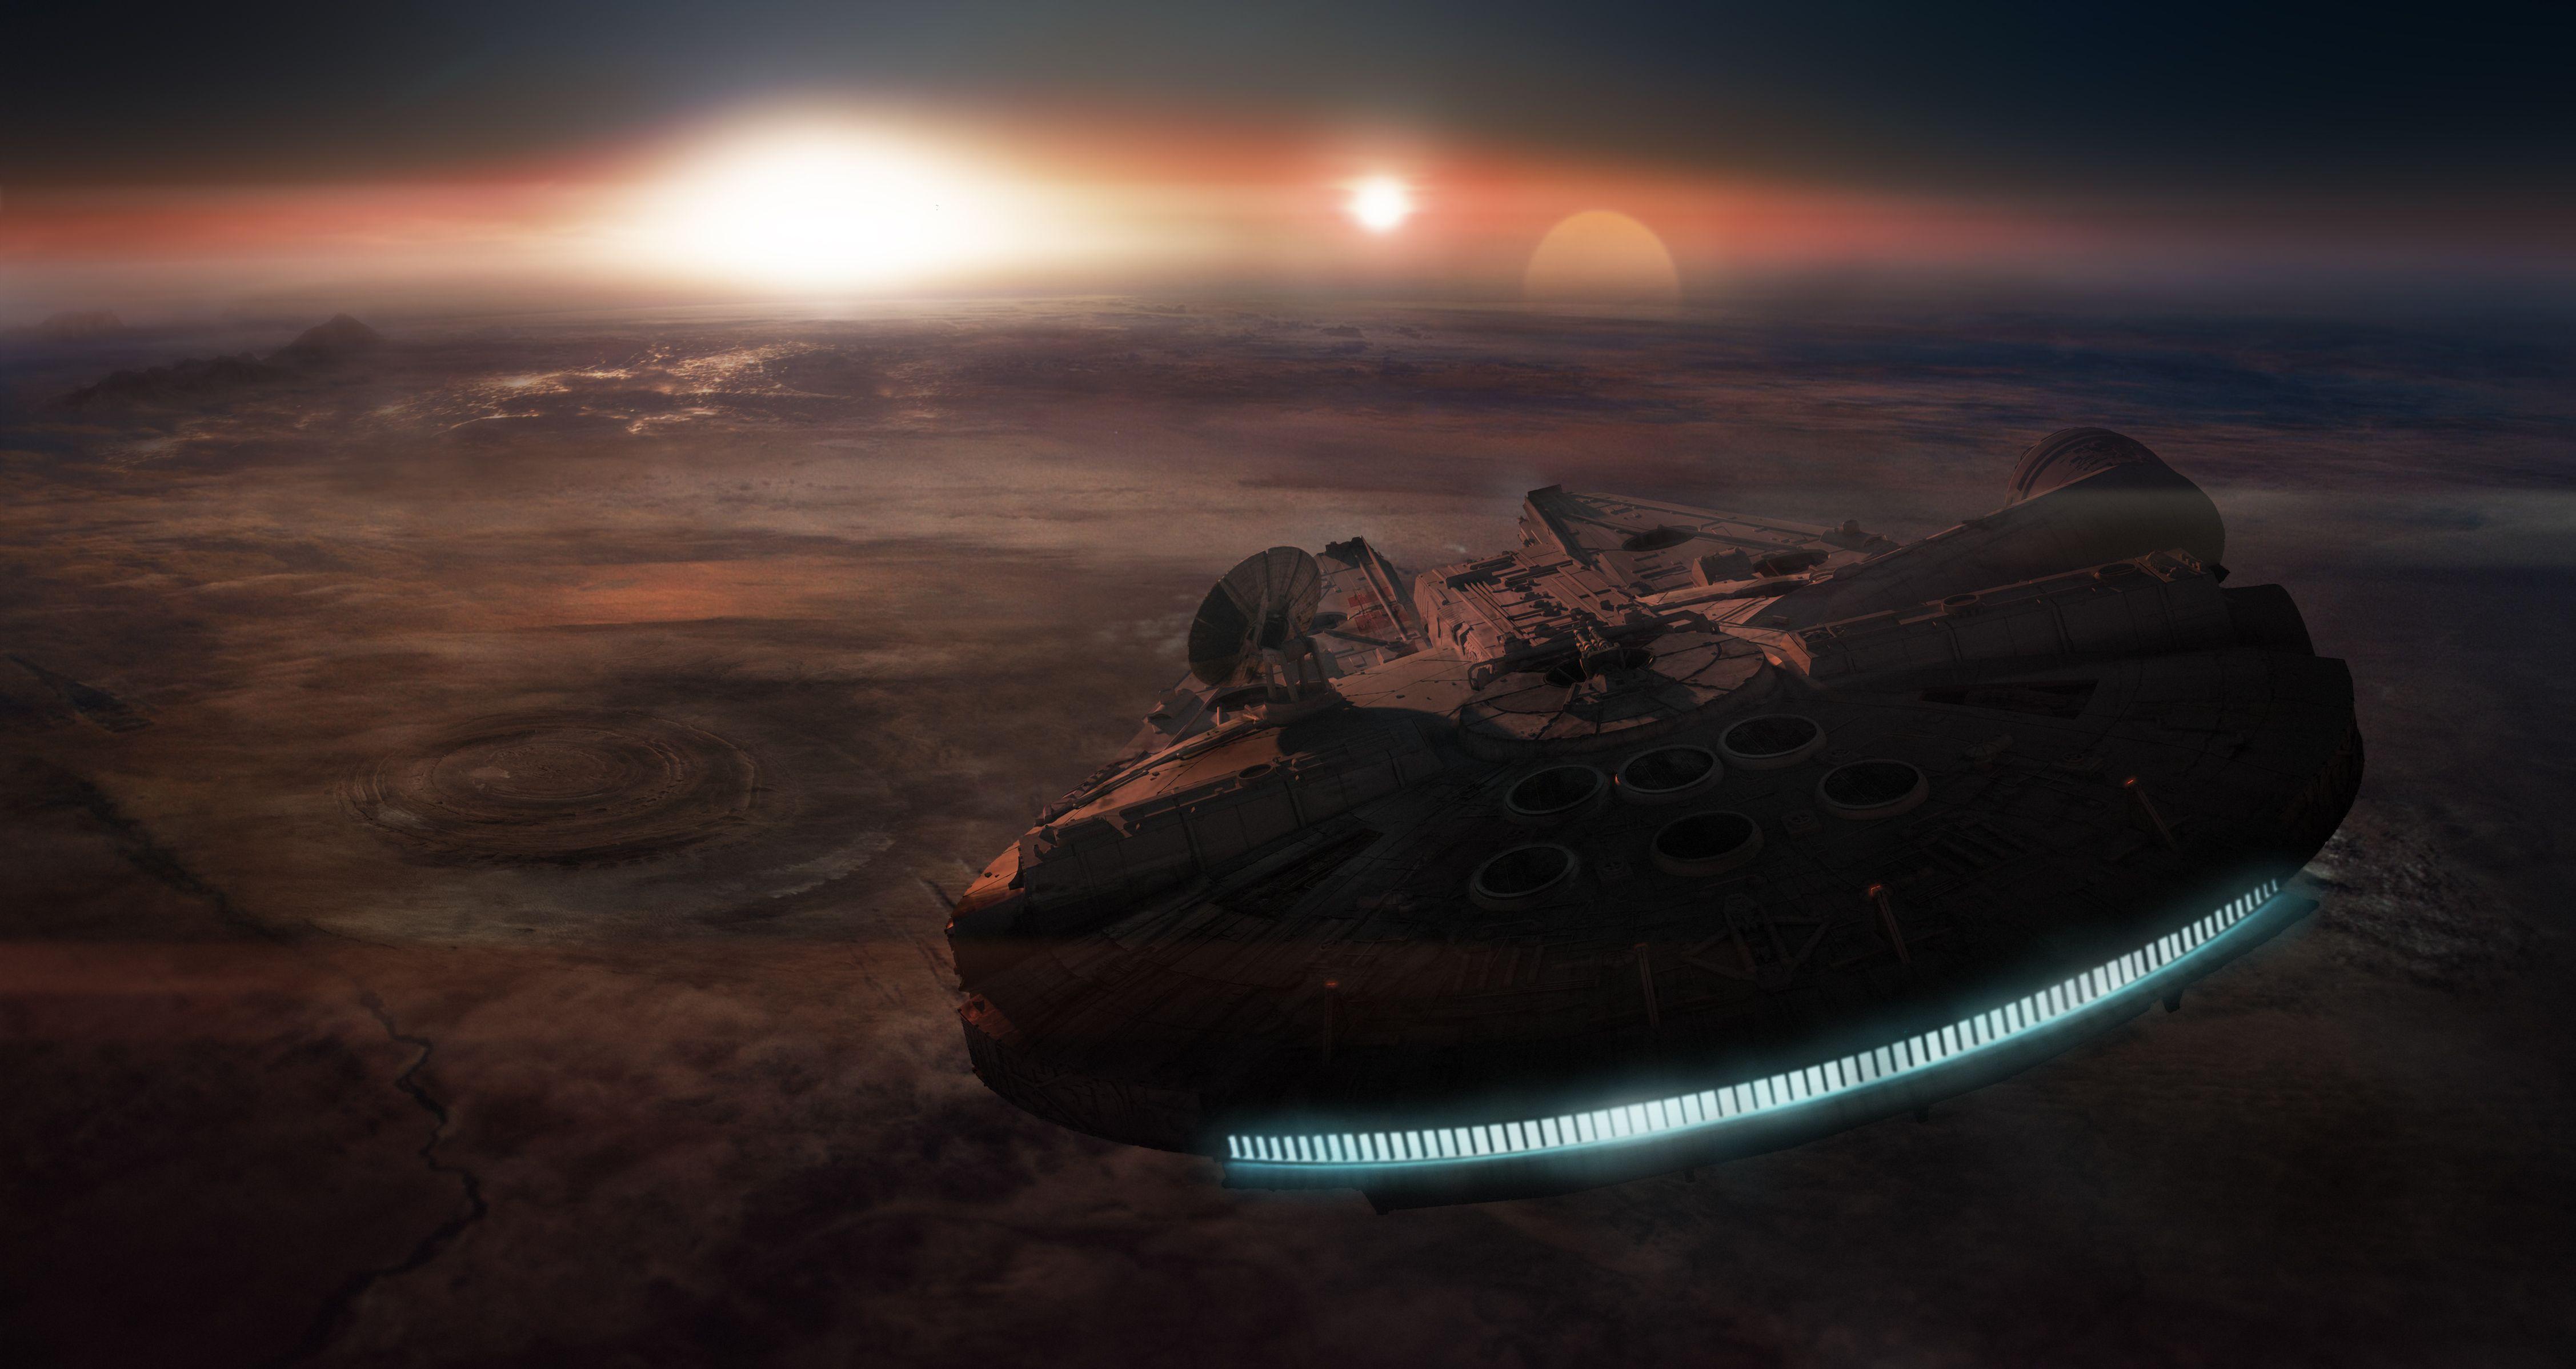 4K CGI composite of what I think the Falcon might look like over